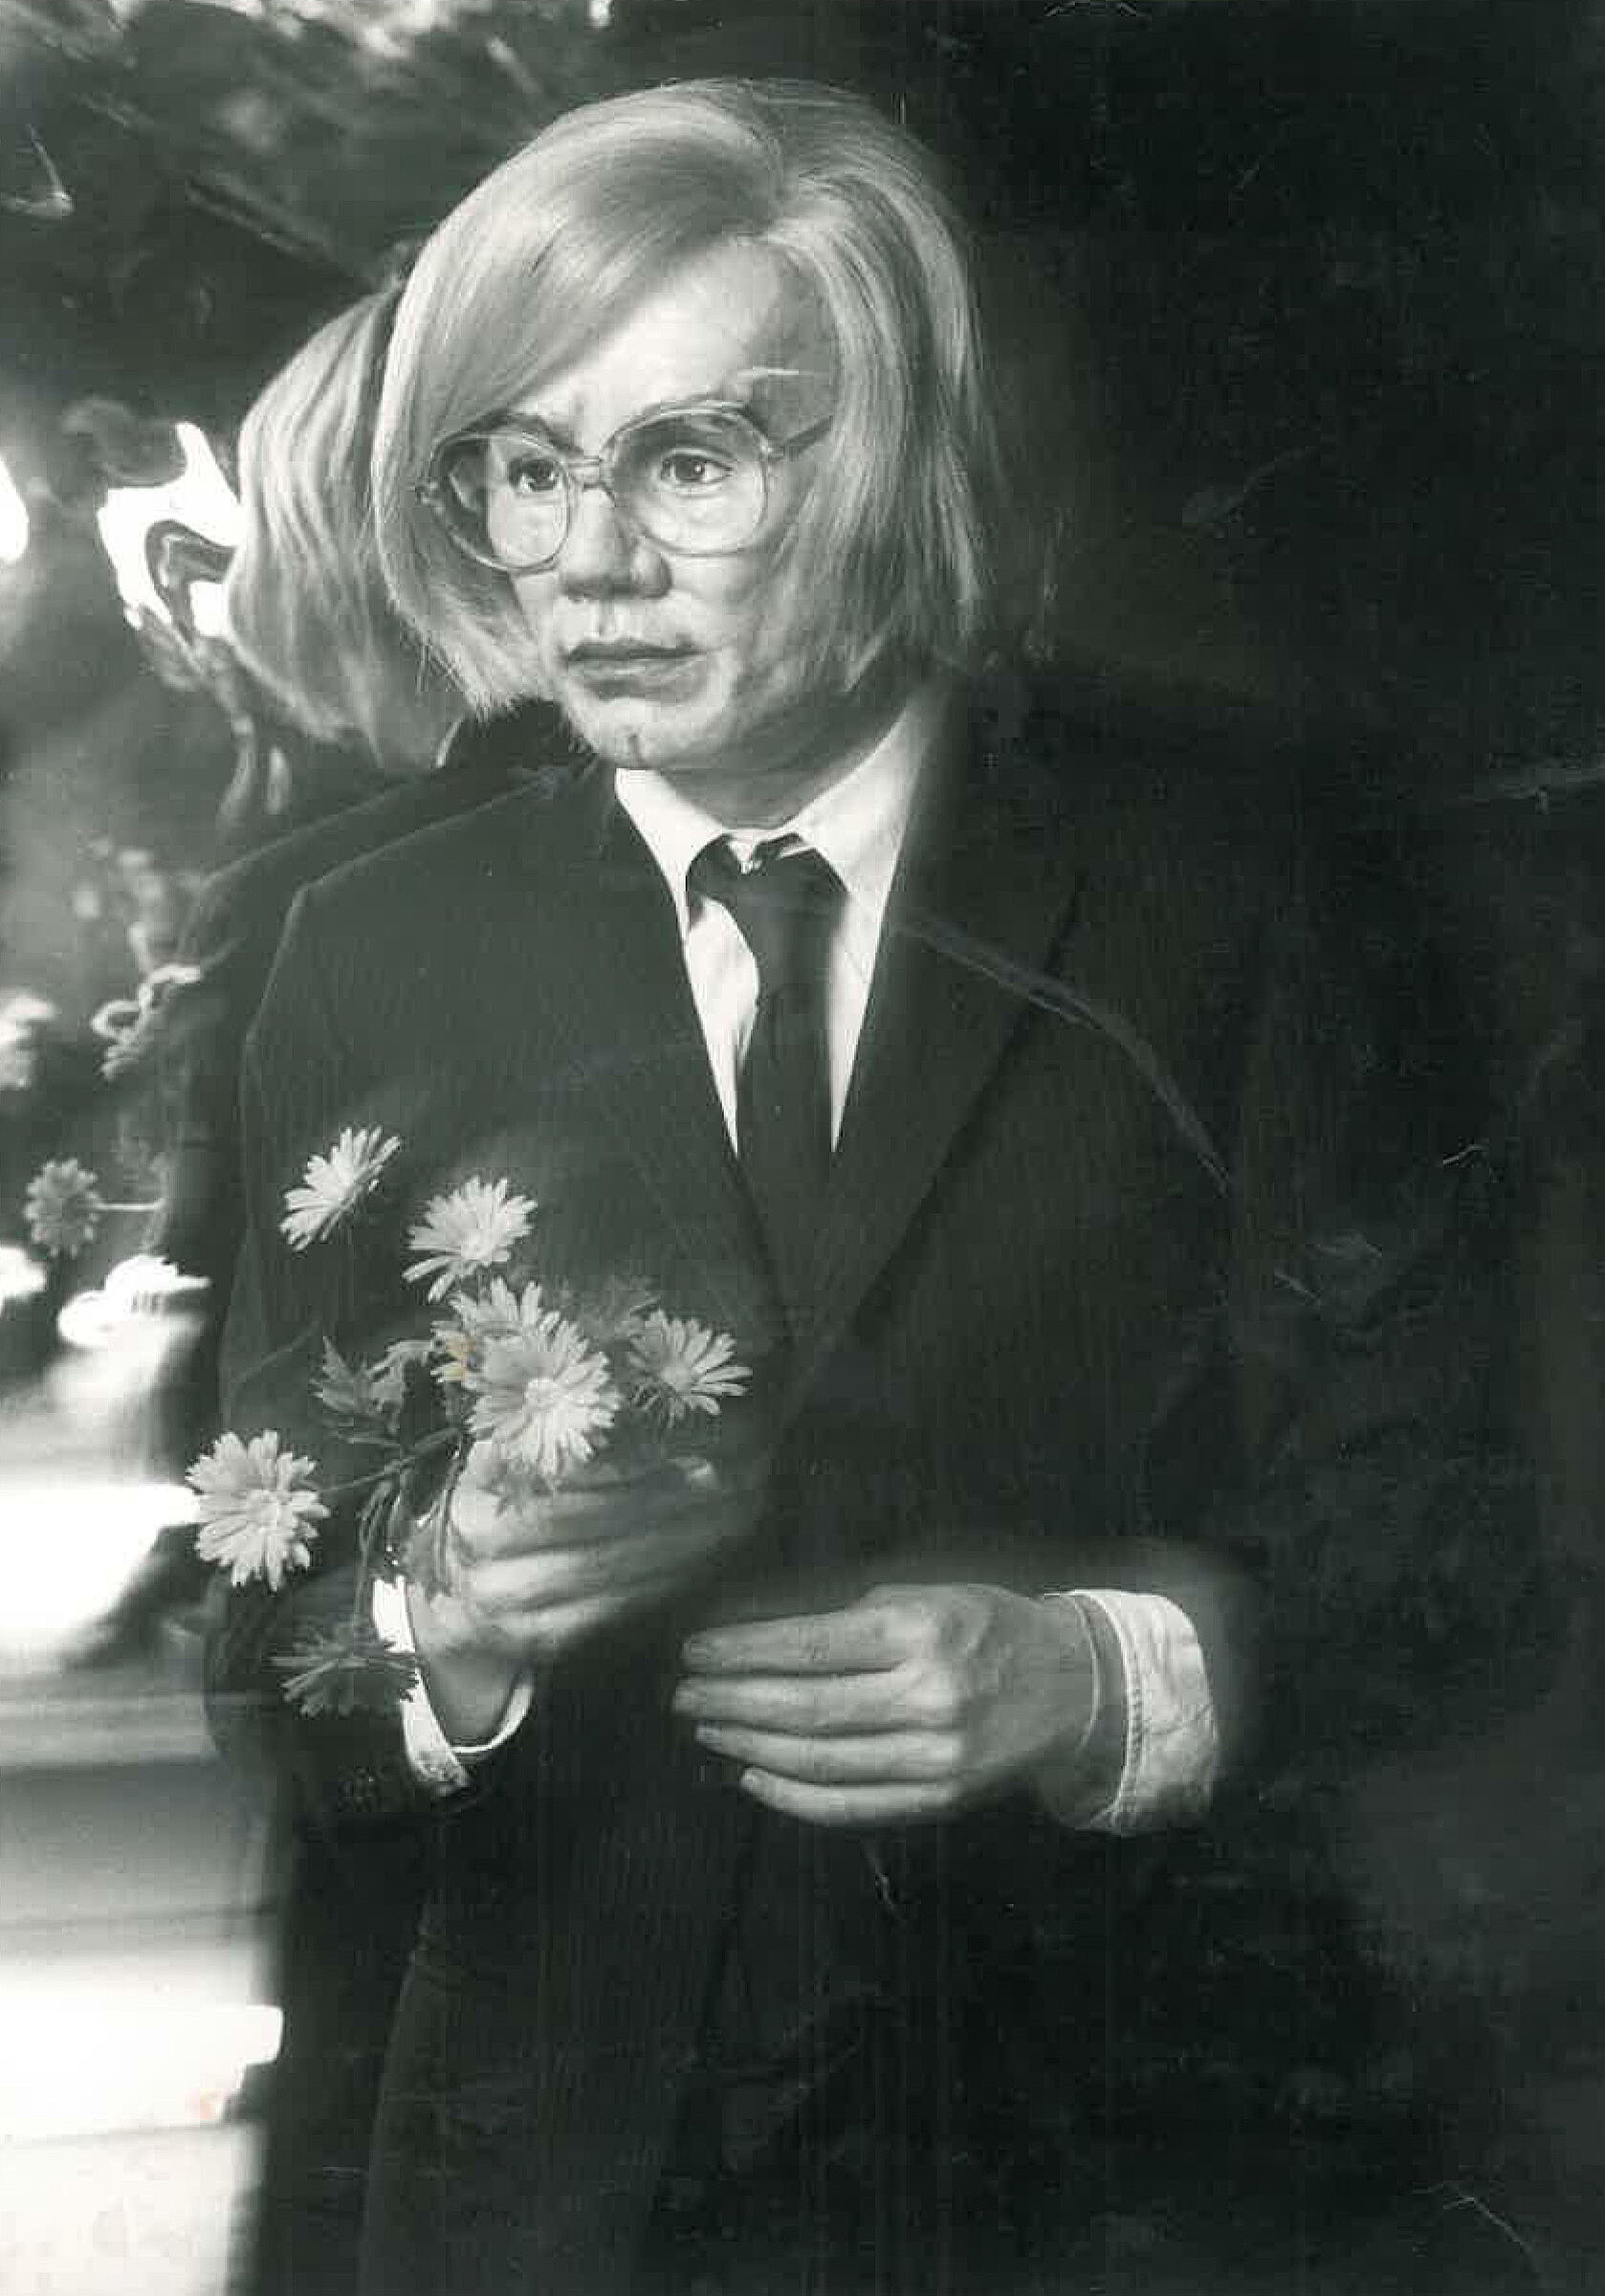 Person with blond hair and round glasses holding daisies, wearing a suit and tie.